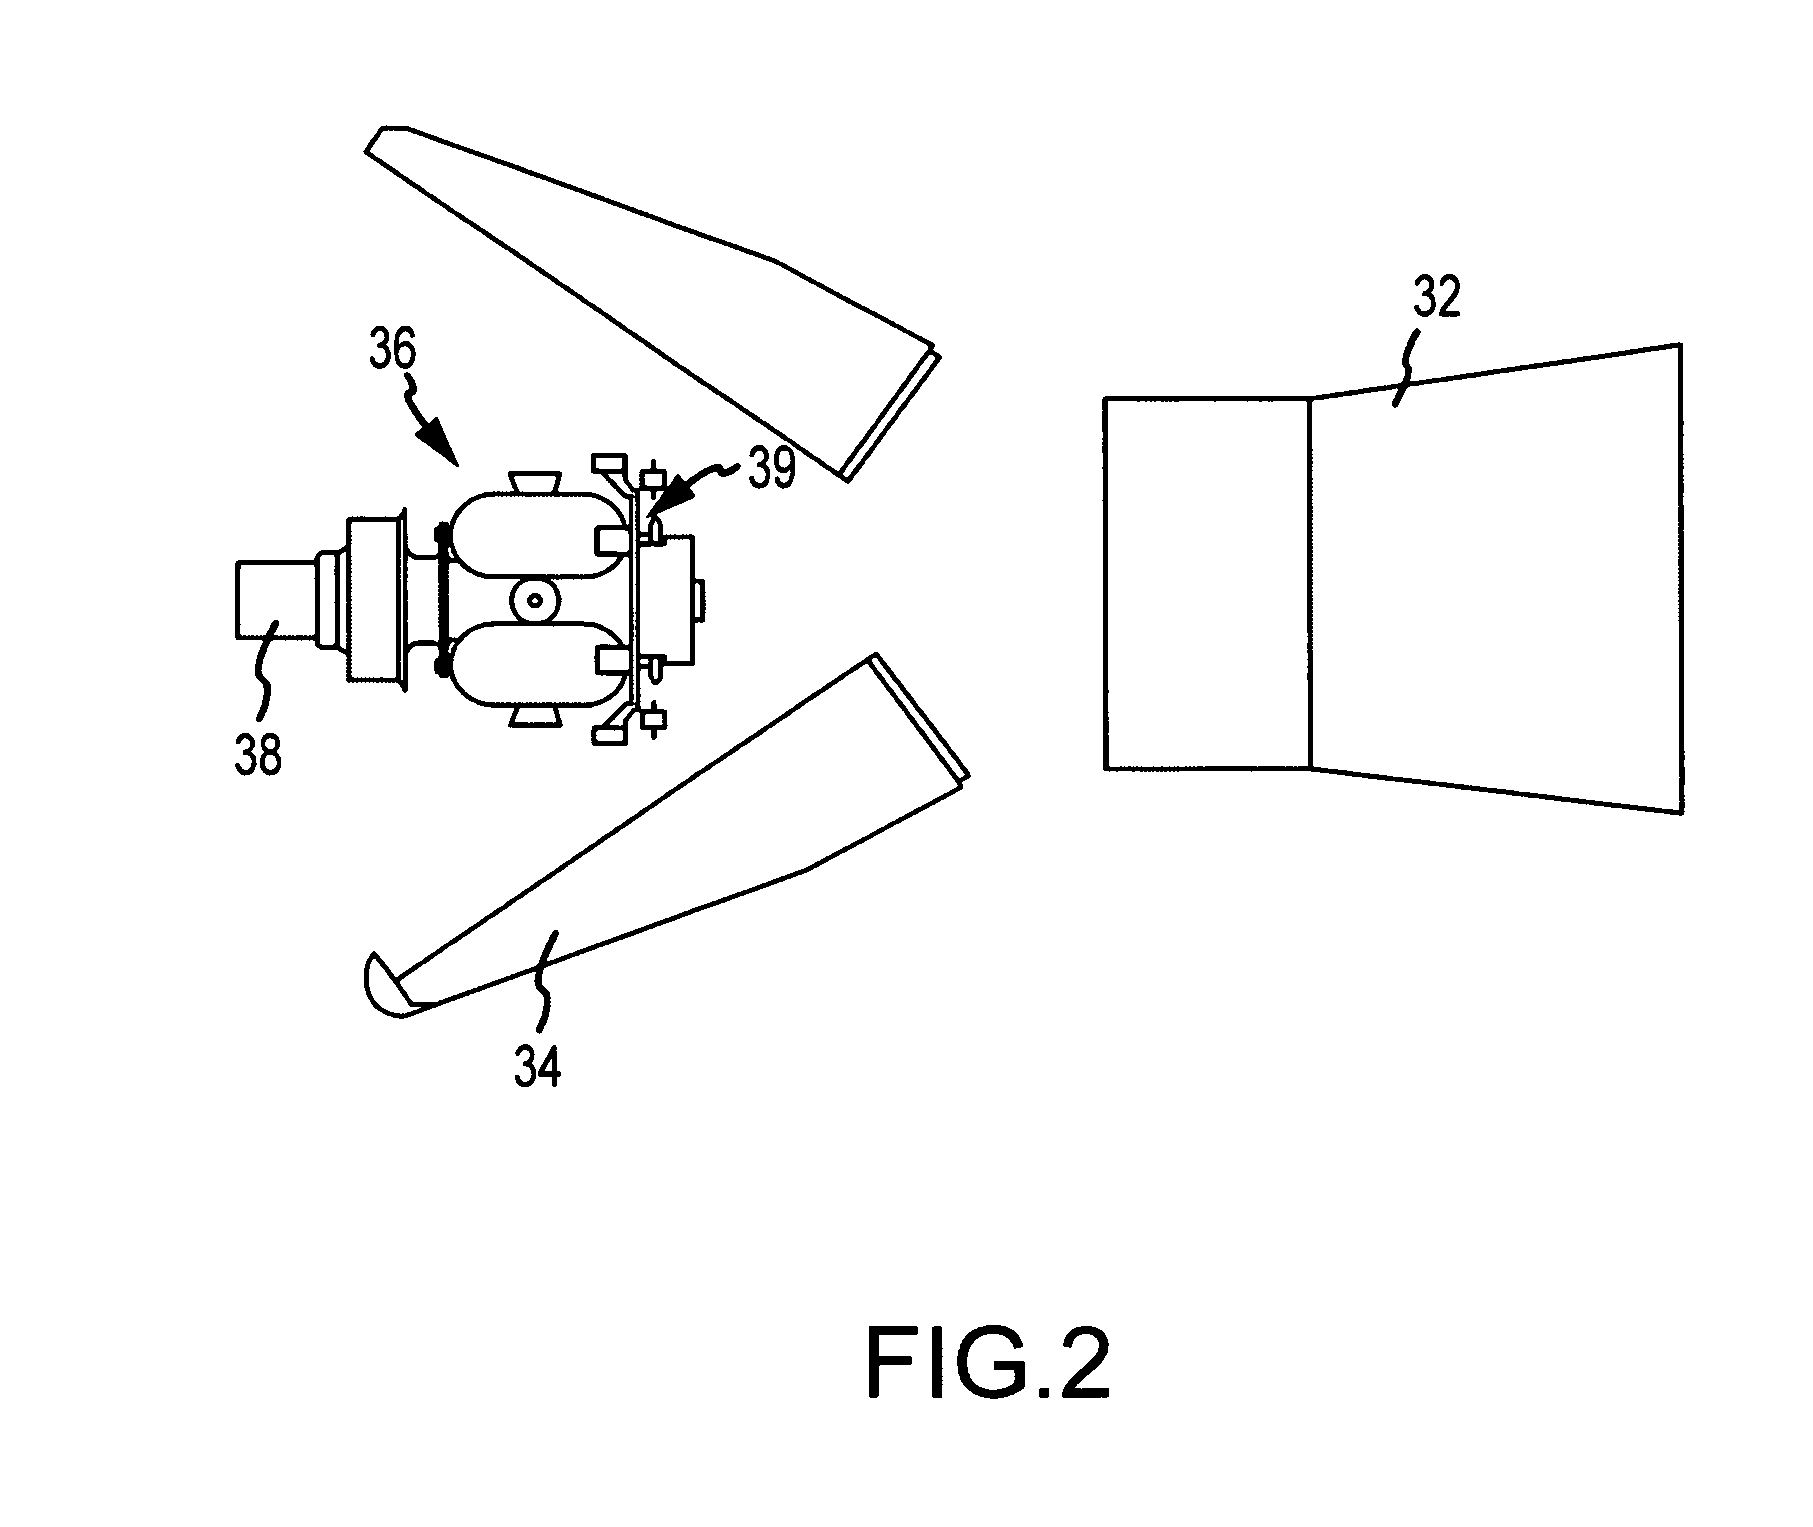 Active vortex control system (AVOCS) method for isolation of sensitive components from external environments